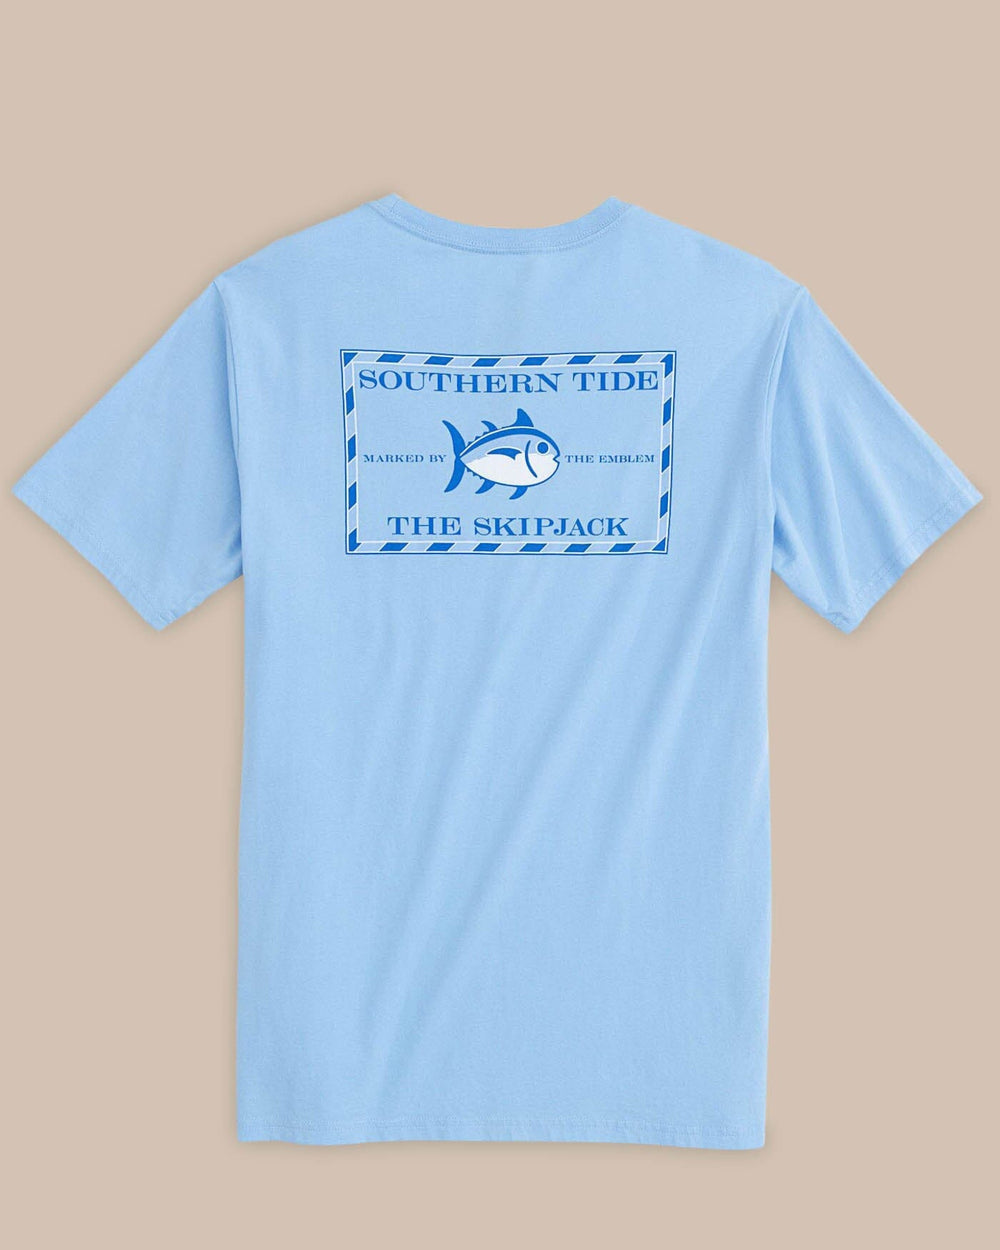 The back view of the Men's Blue Original Skipjack Short Sleeve T-Shirt by Southern Tide - Ocean Channel